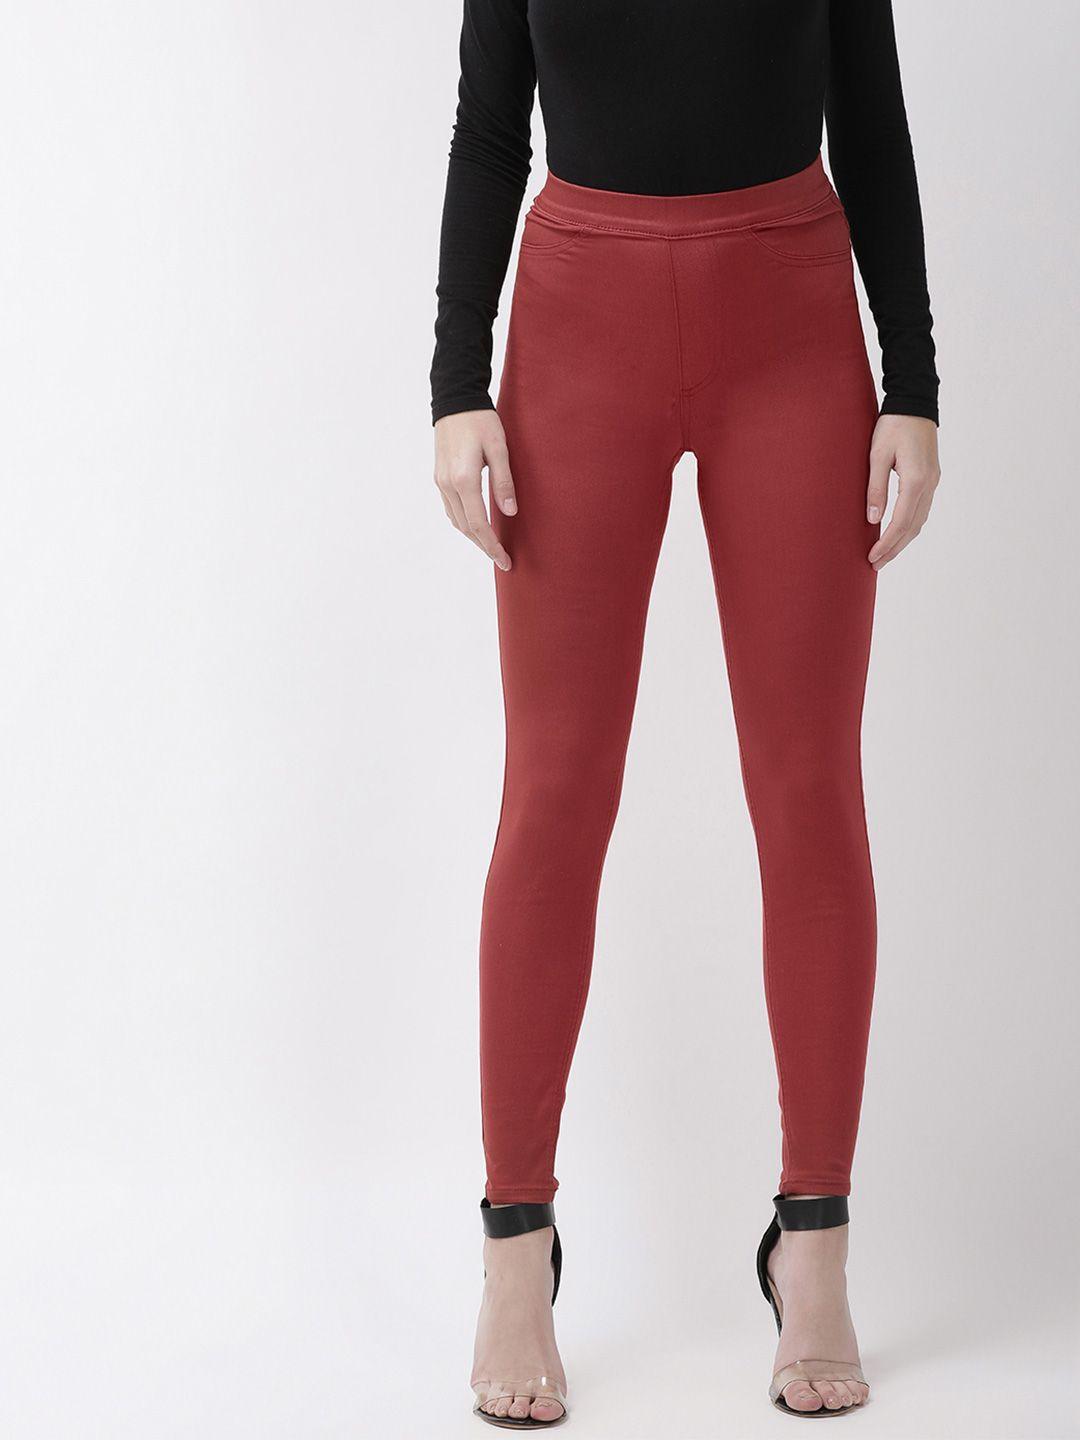 marks & spencer women rust red high-rise solid jeggings